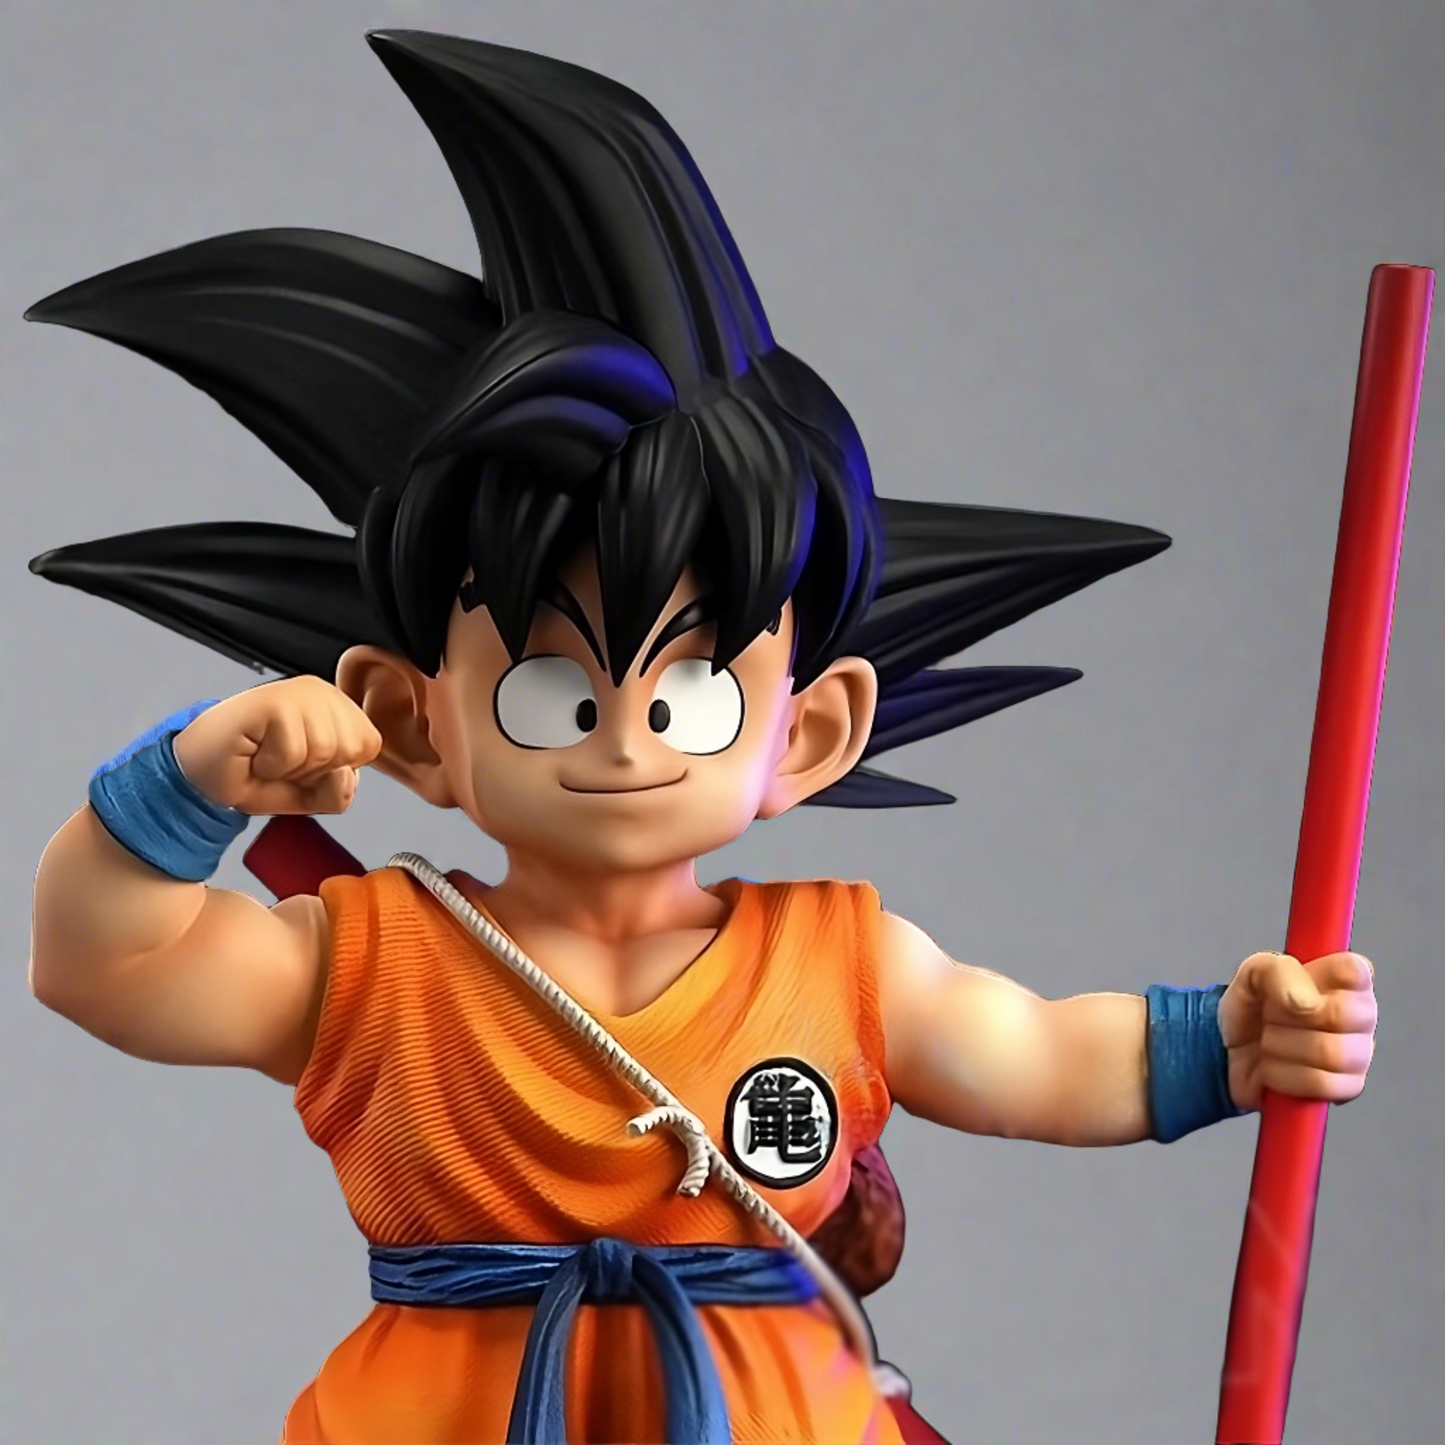 Close-up of the collectible Dragon Ball figure of young Goku, featuring his cheerful expression and spiky hair, complete with his Power Pole and detailed attire."